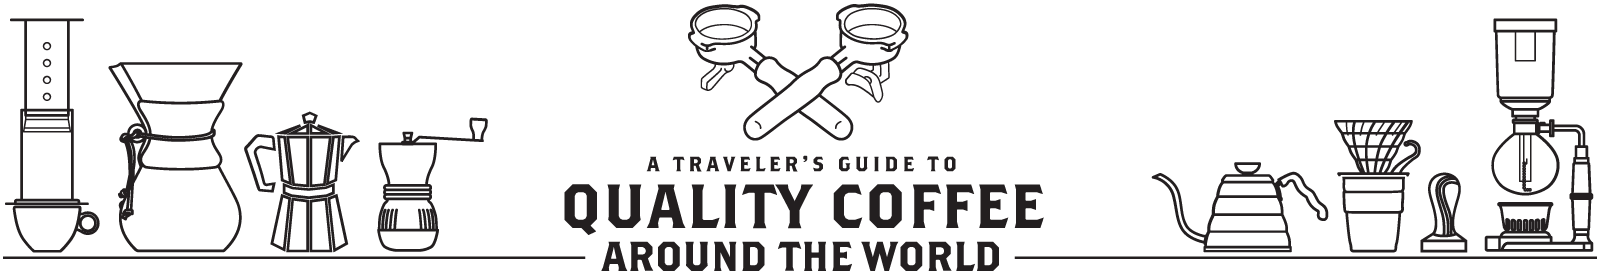 A Traveler's Guide to Quality Coffee Around the World